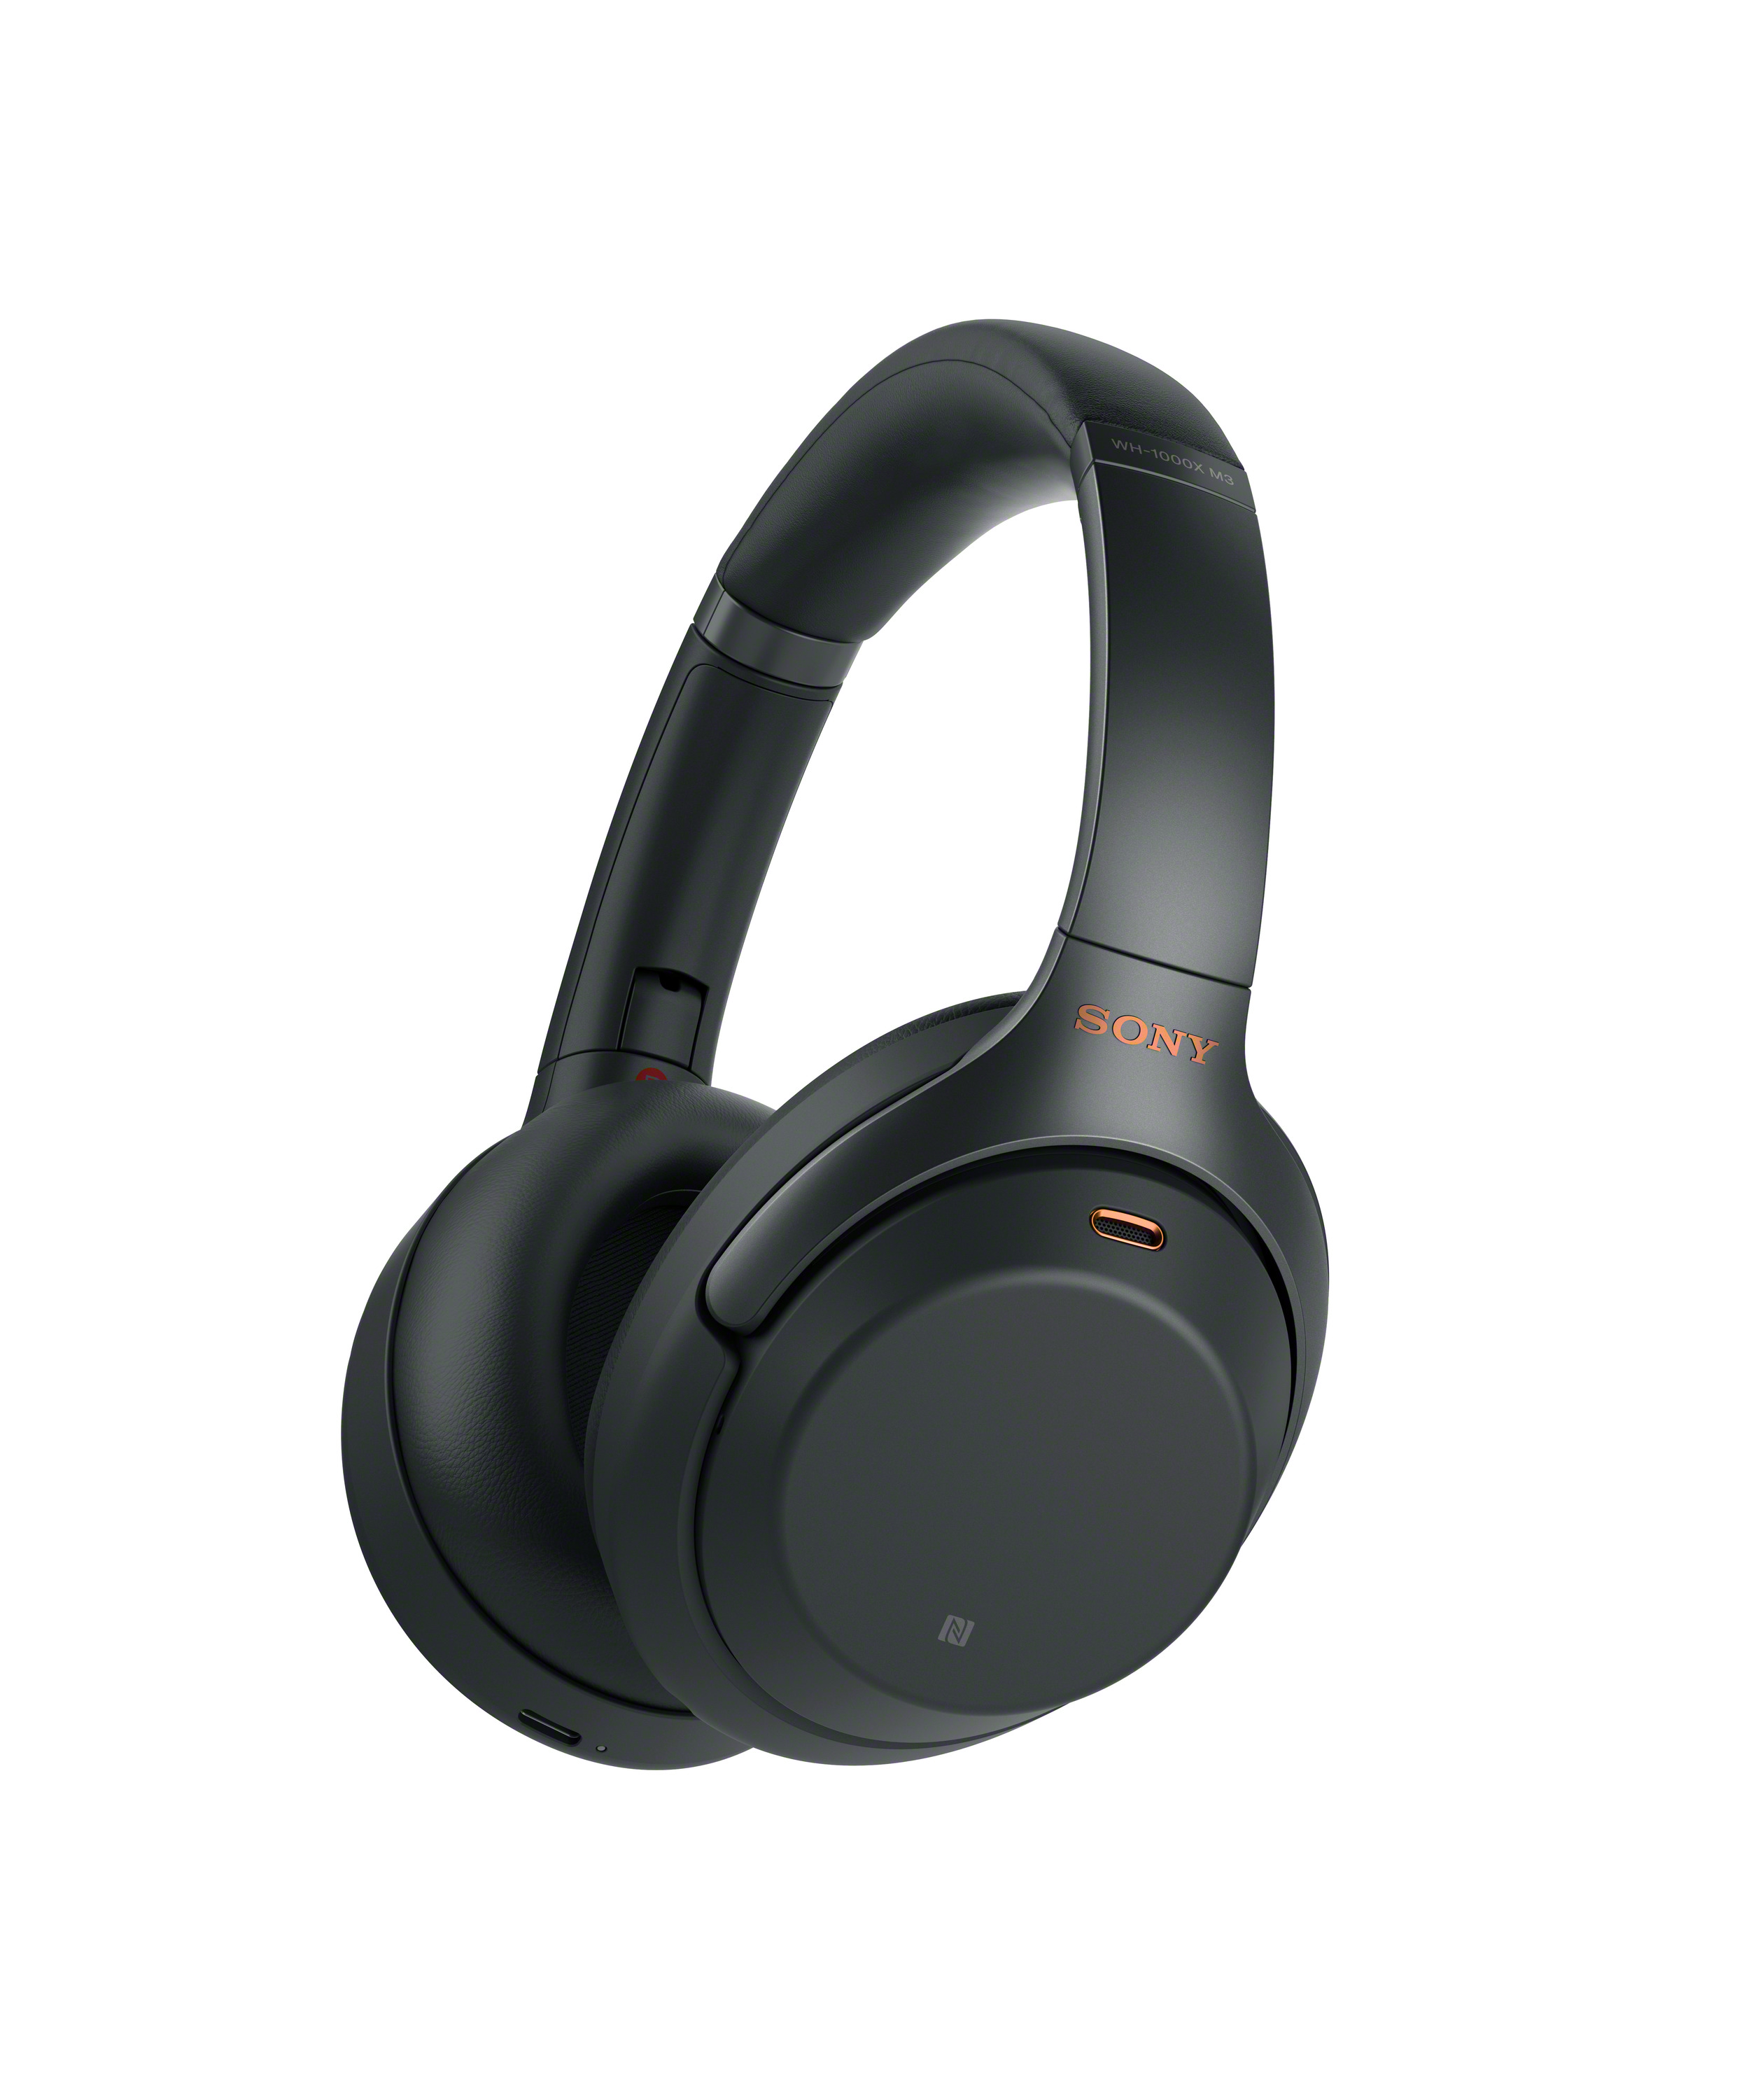 Sony’s New Industry Leading Noise Cancelling WH-1000XM3 Headphones – New Sony Noise Cancelling Headphones